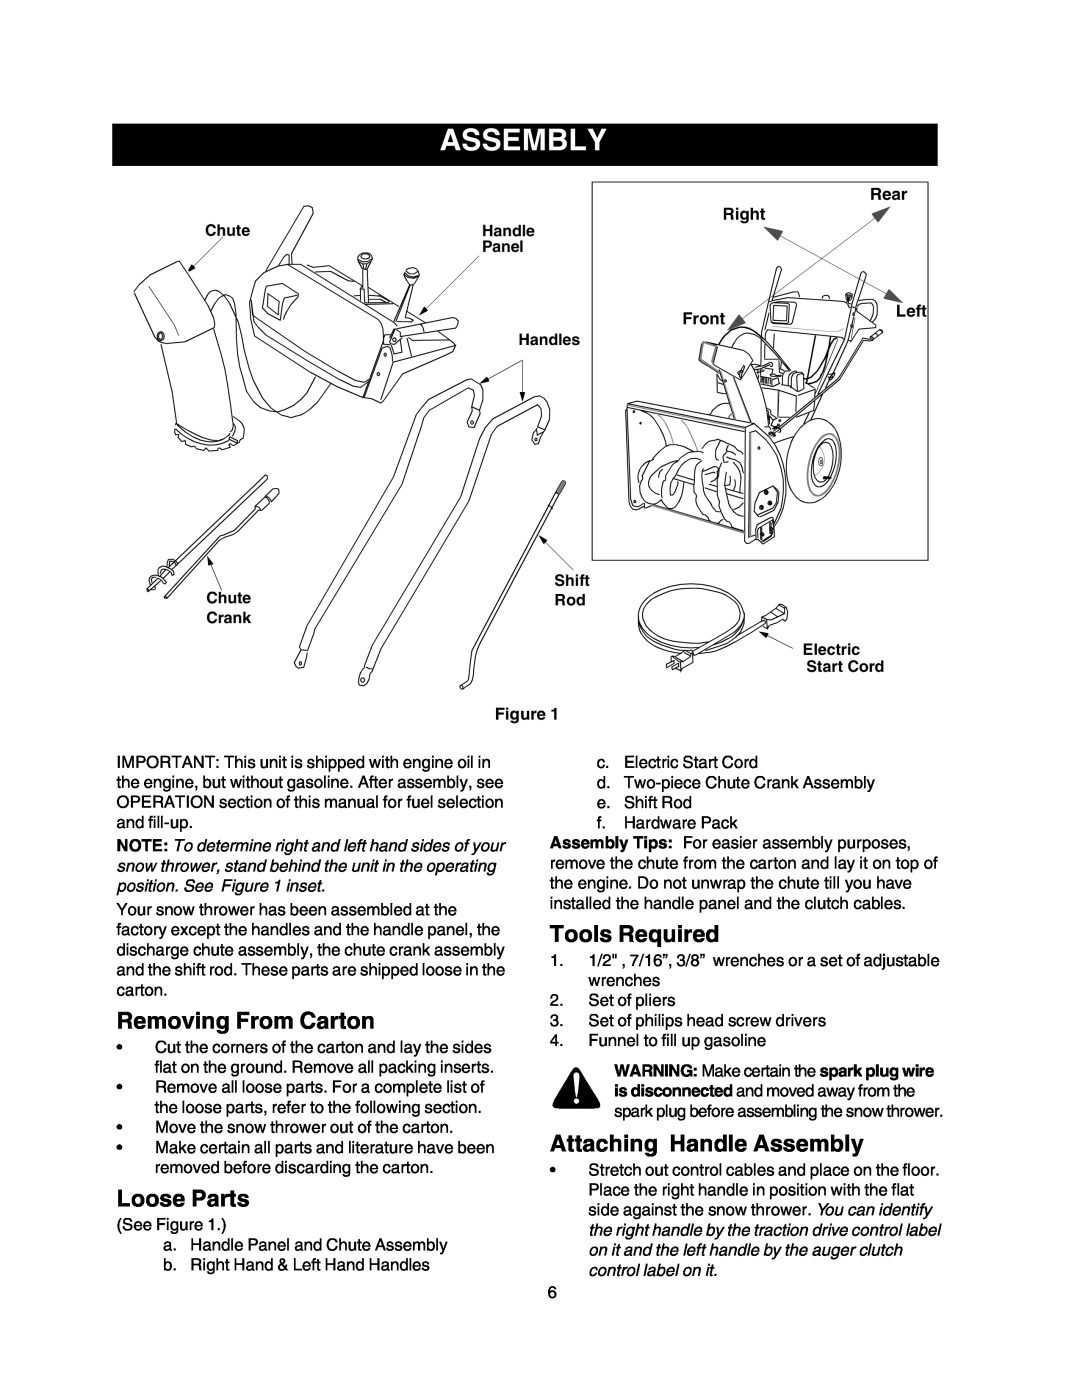 Craftsman 247.88853 Removing From Carton, Loose Parts, Tools Required, Attaching Handle Assembly, Rear, Right, Front 